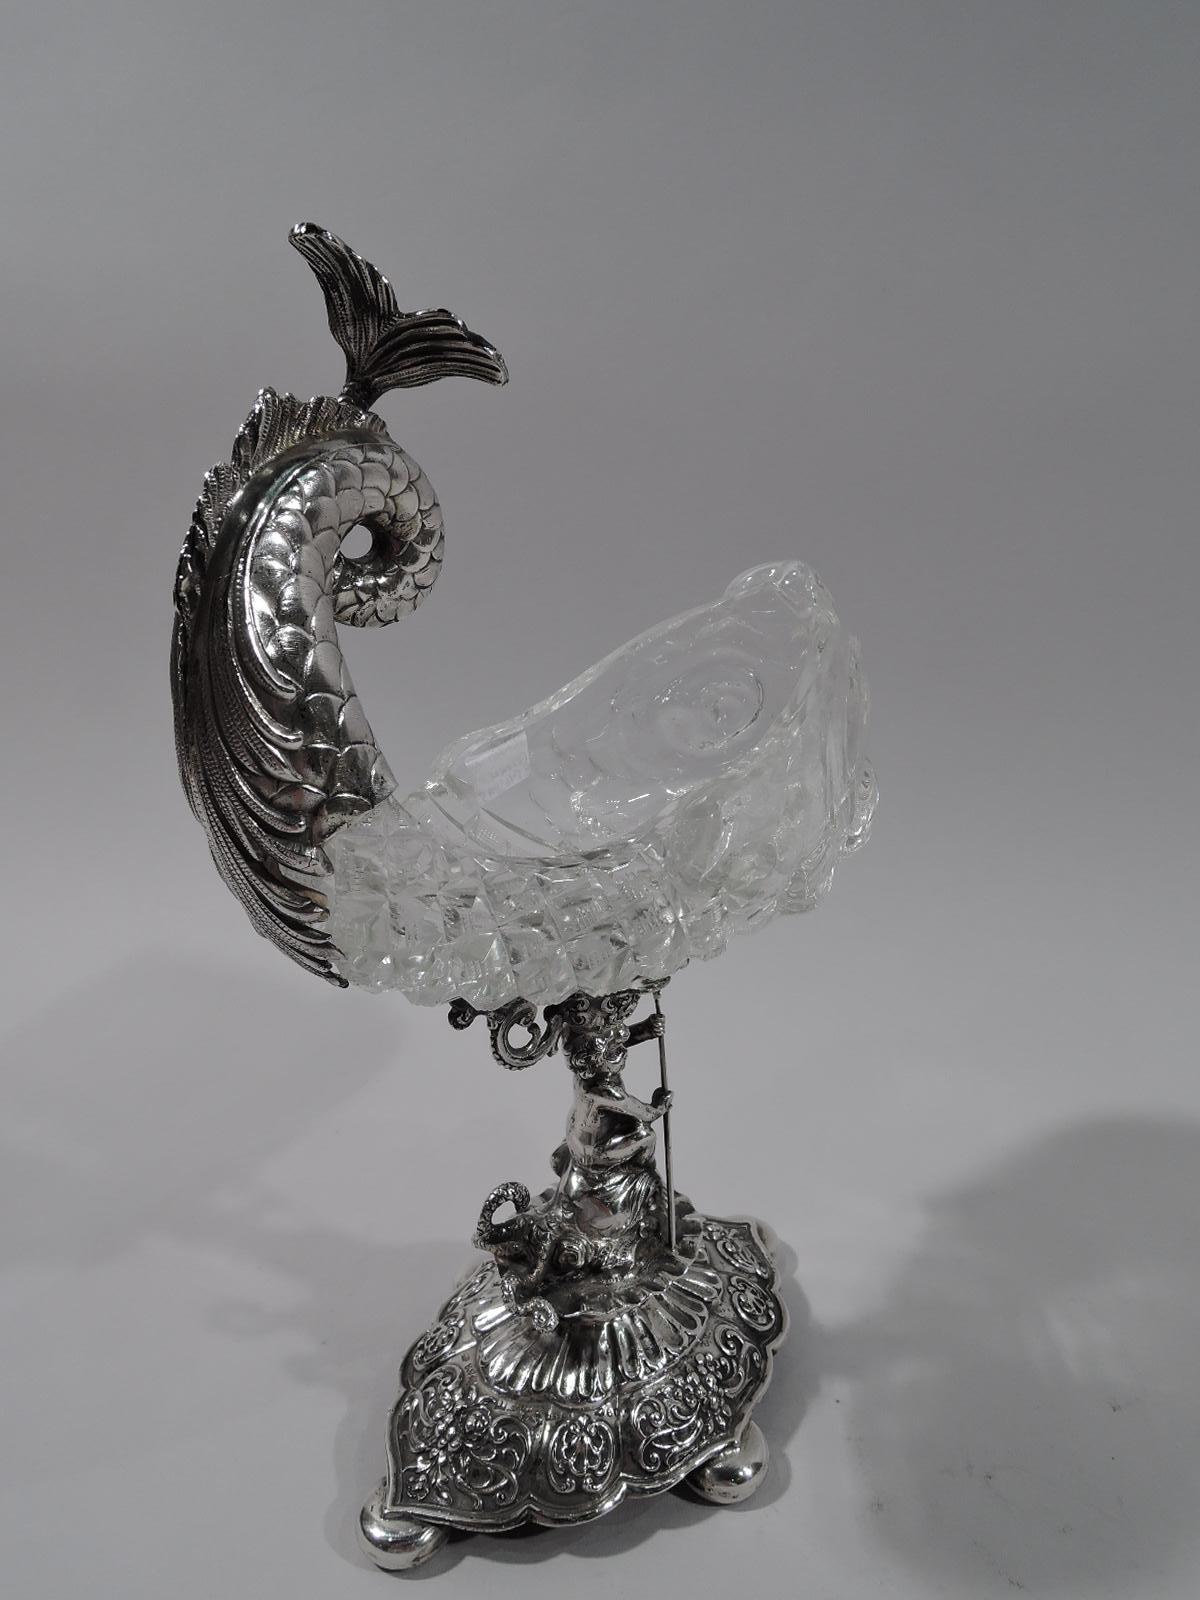 Turn-of-the-century German Renaissance 800 silver and cut-glass sweetmeat bowl. Cut-glass dolphin with up-turned silver-mounted scrolled tail. Support in form of trident-wielding cherub astride another dolphin. Raised and scalloped foot on 4